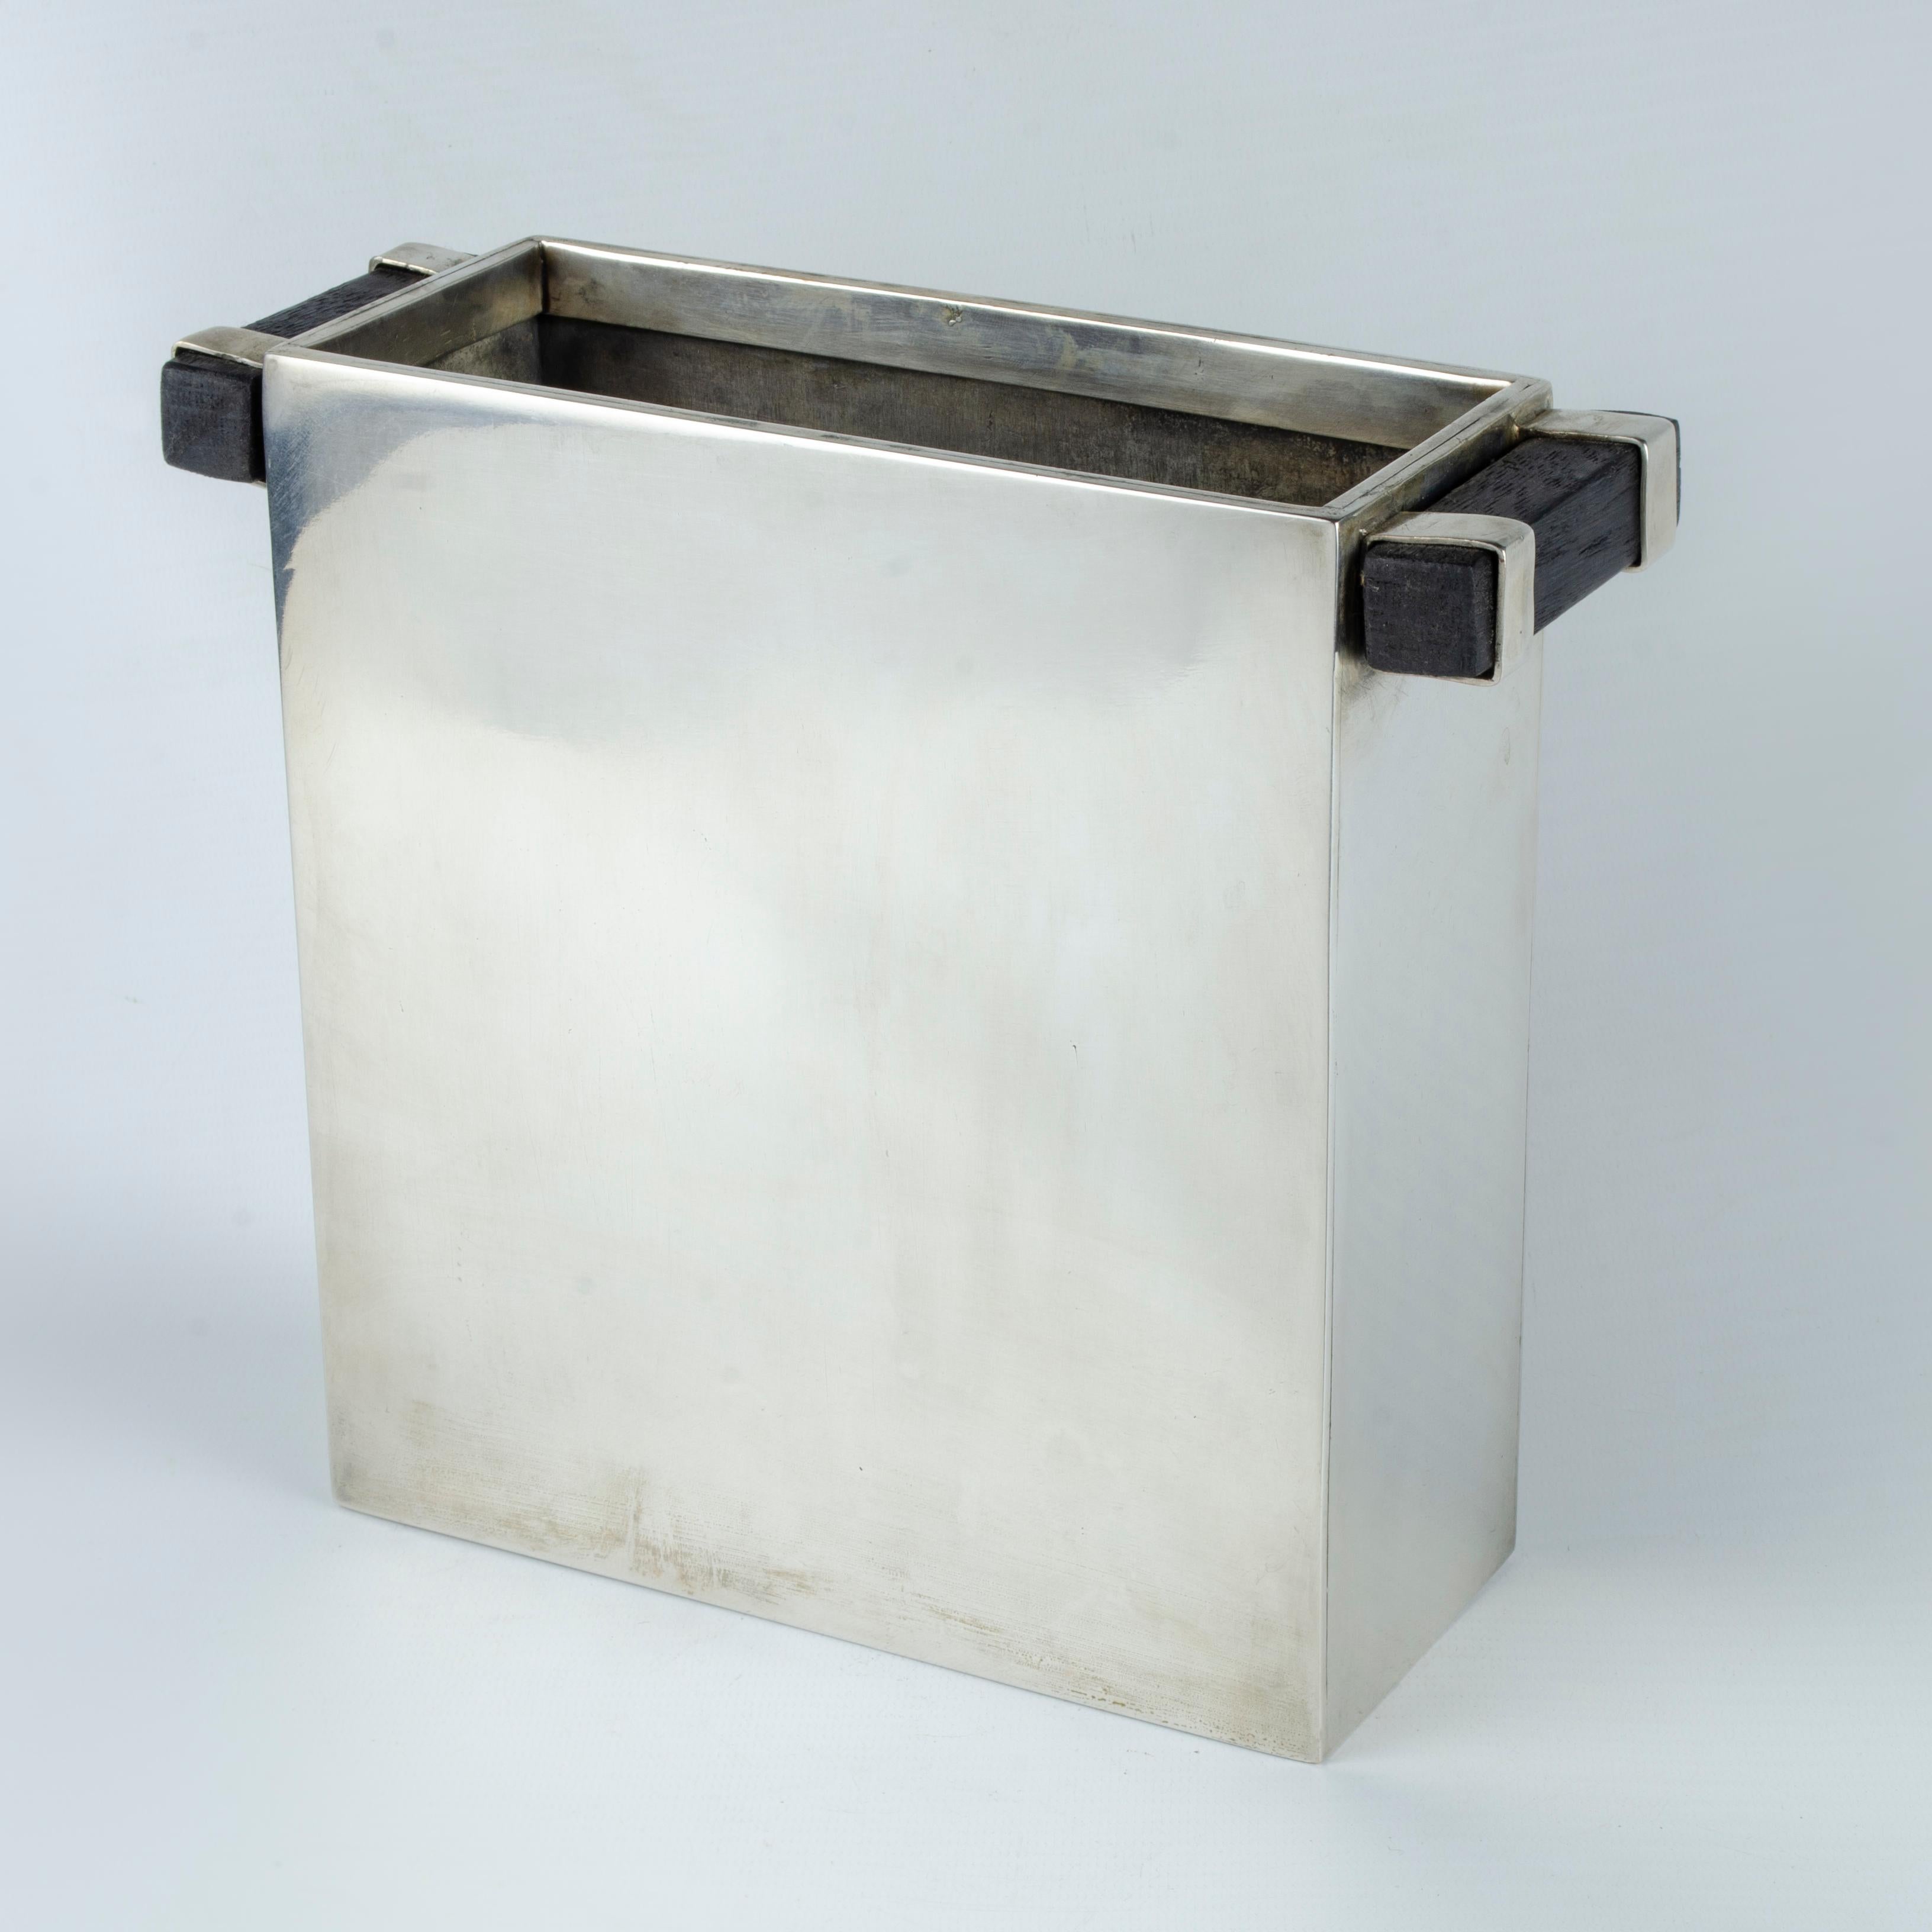 Rectangular vase, made of silver metal with wooden handles, designed by Maison Desny Paris (1927-1933). It was produced in different sizes. One of these specimens is exhibited in the 